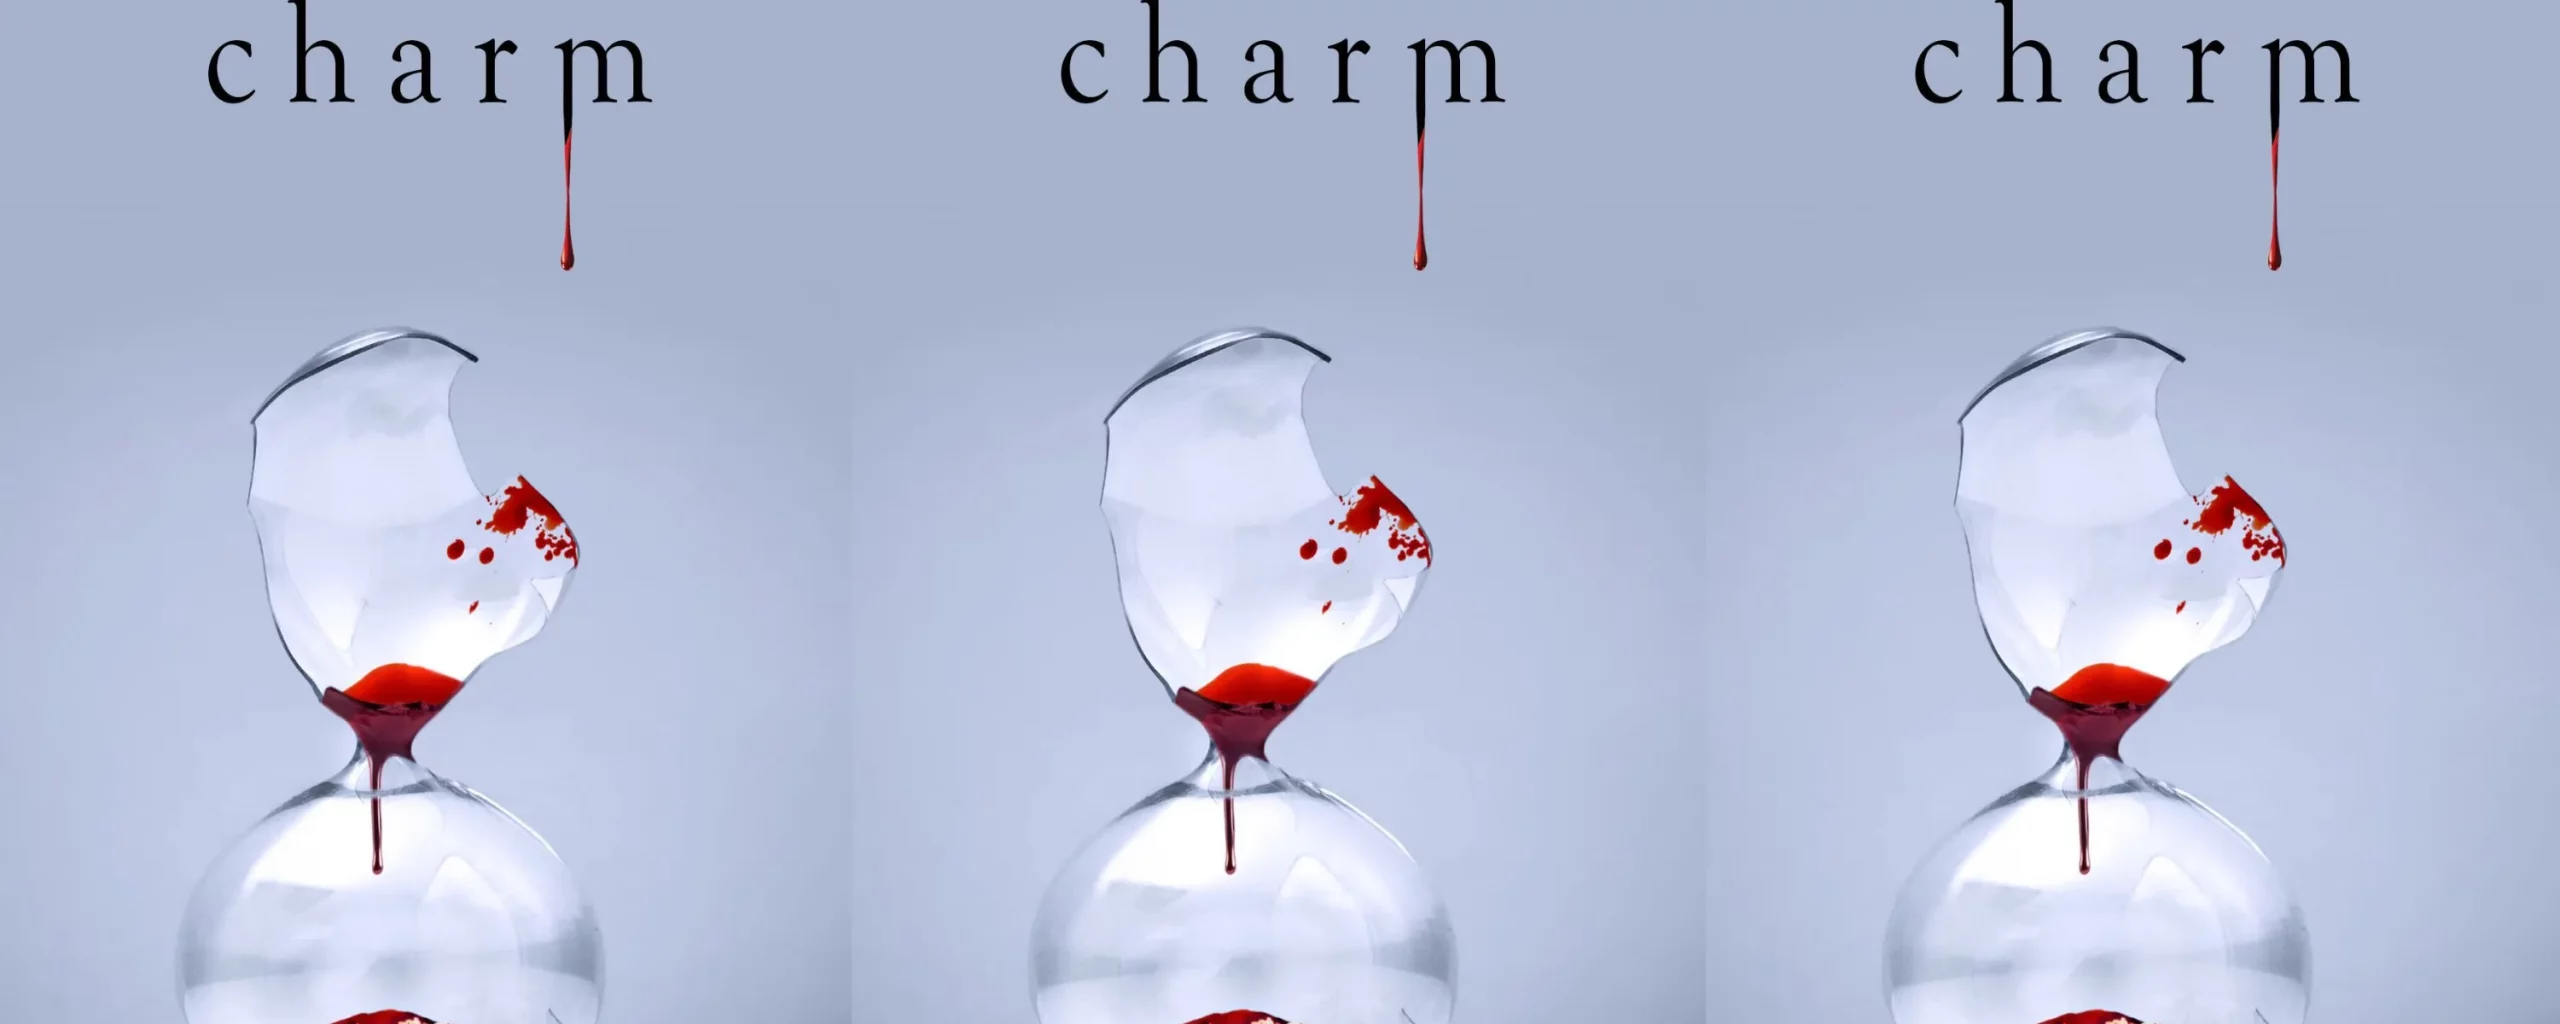 Fifth Book In The Crave Series, Charm By Tracy Wolff: Release Date